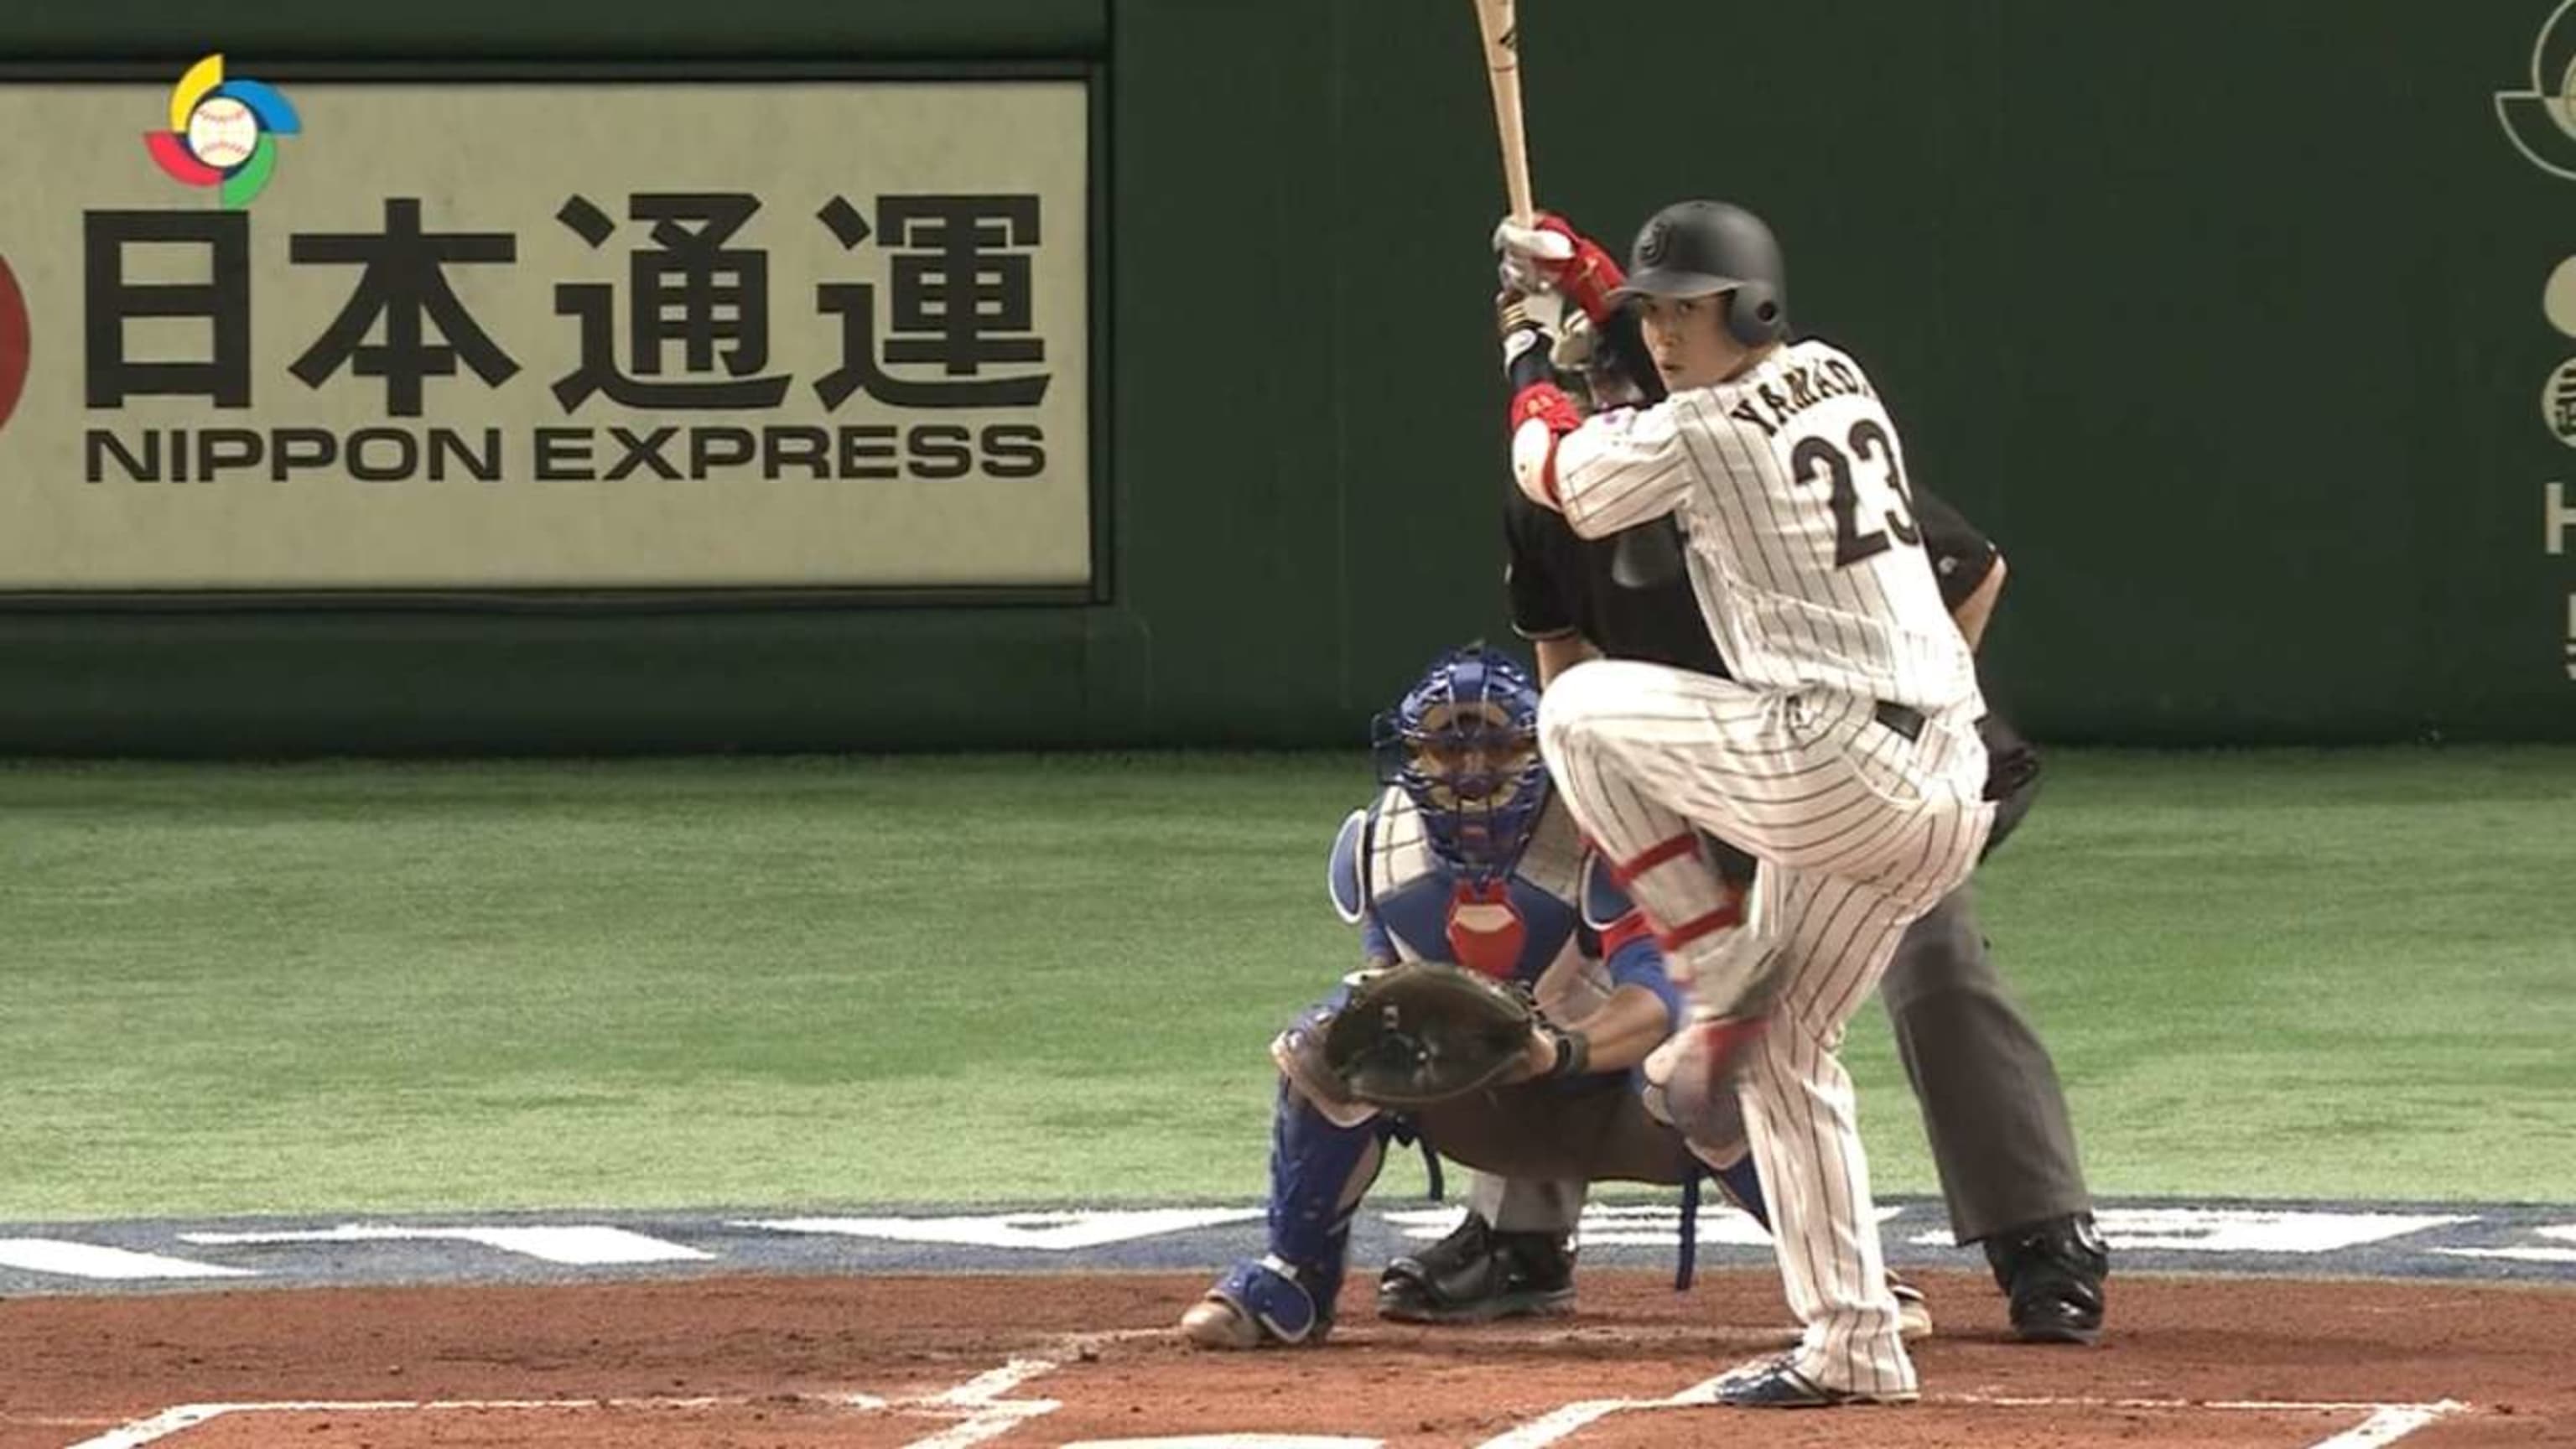 Tetsuto Yamada Ends Slump and Leads Yakult Past Orix in Game 3 of Japan  Series